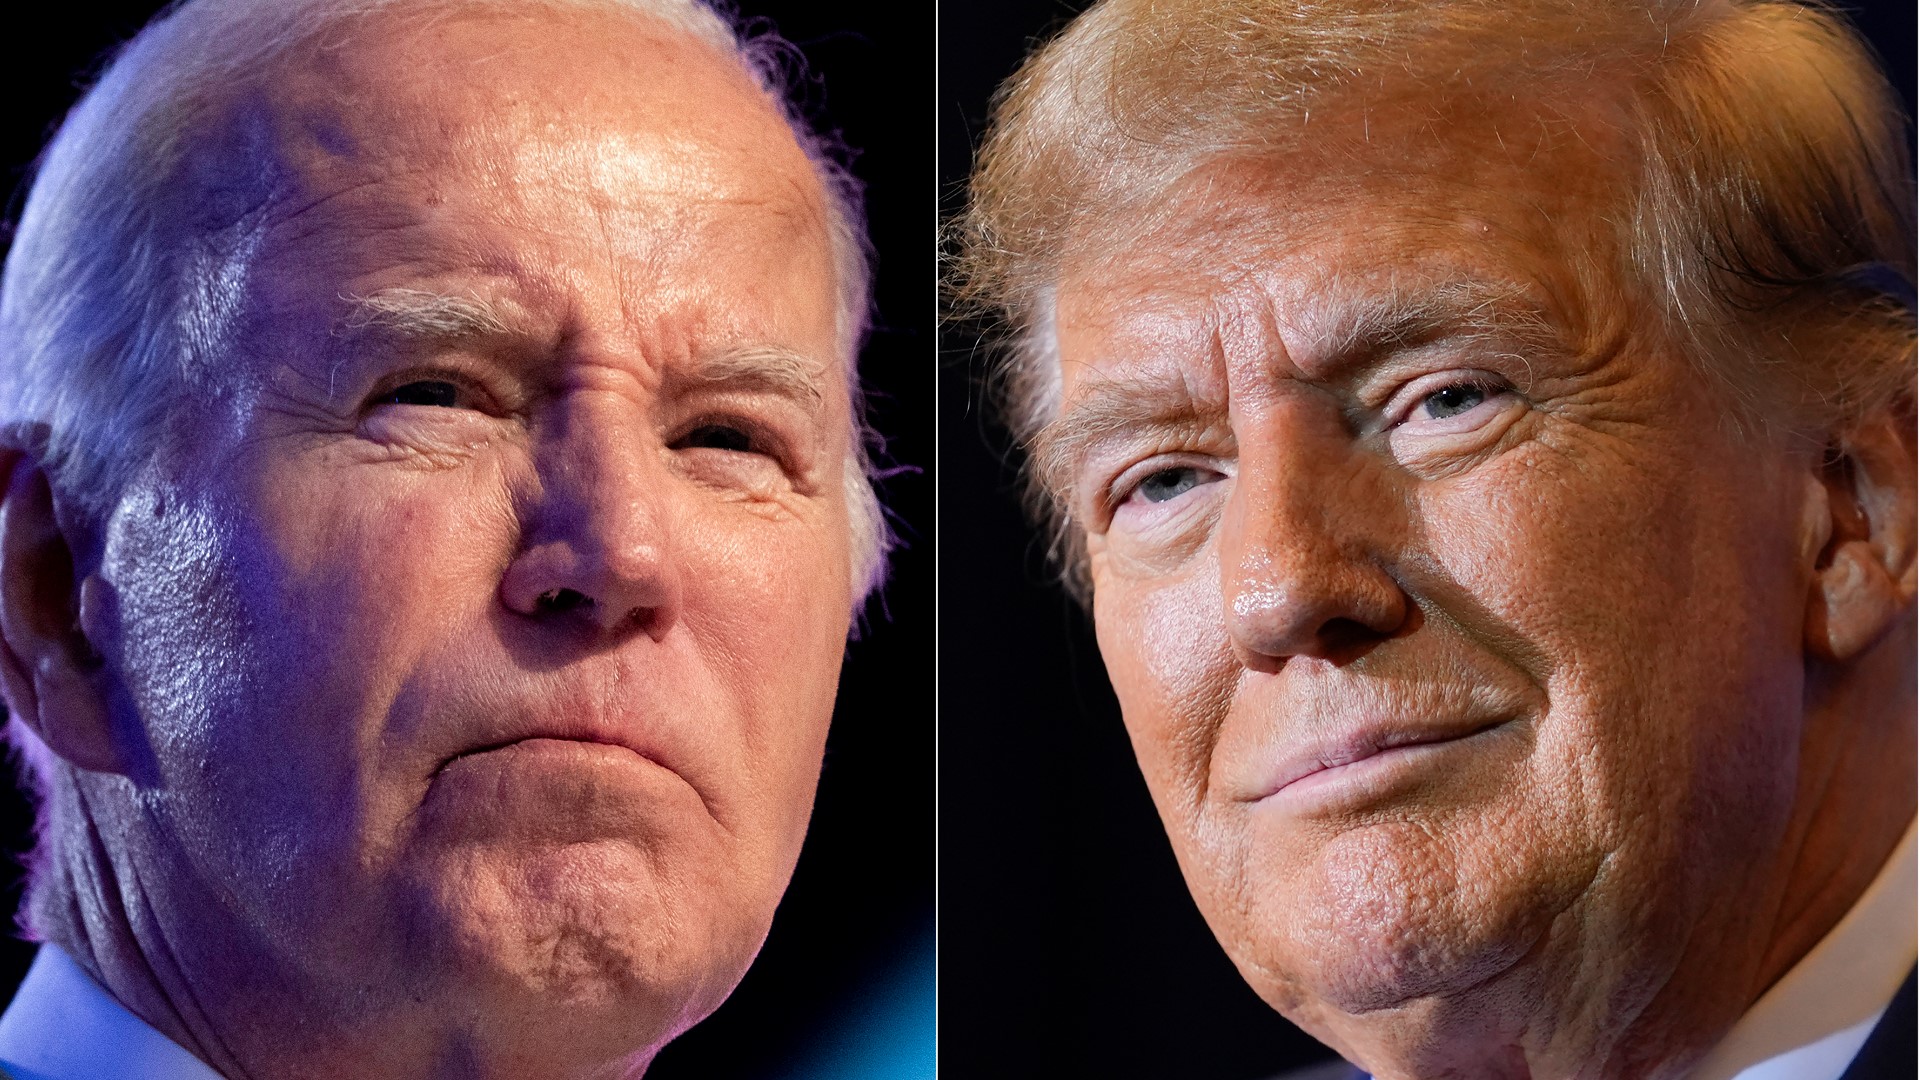 President Joe Biden and former President Donald Trump clinched their parties' presidential nominations Tuesday with decisive victories in a slate of primaries.